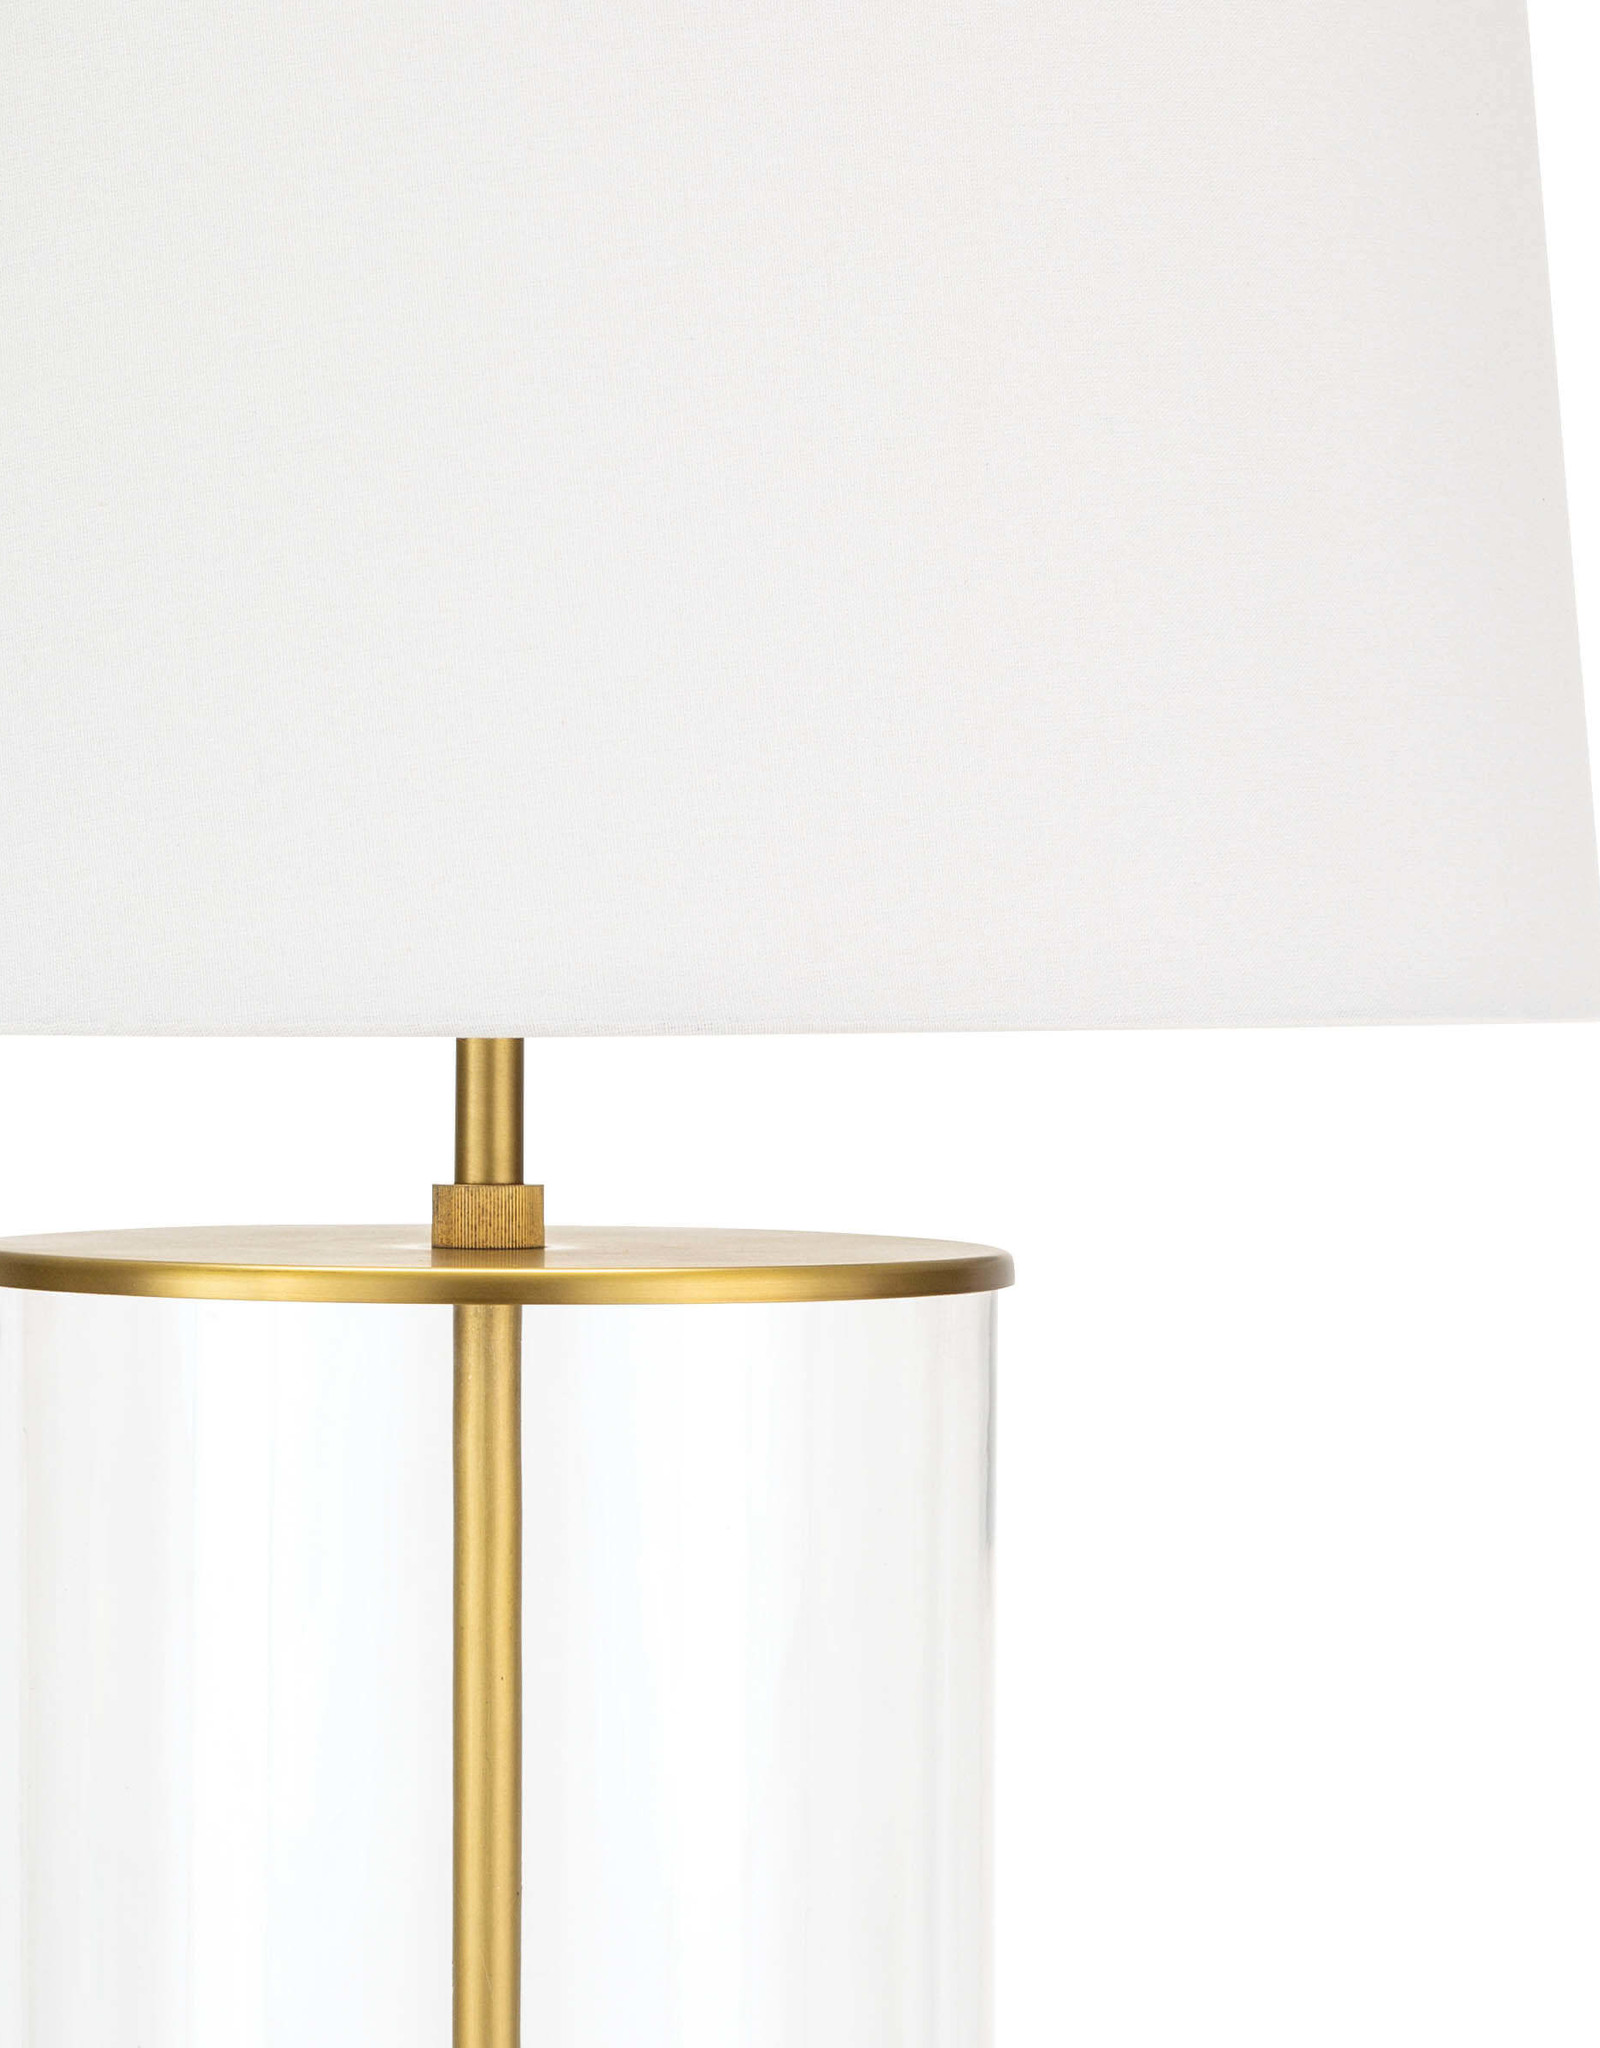 Southern Living Magelian Glass Table Lamp (Natural Brass)